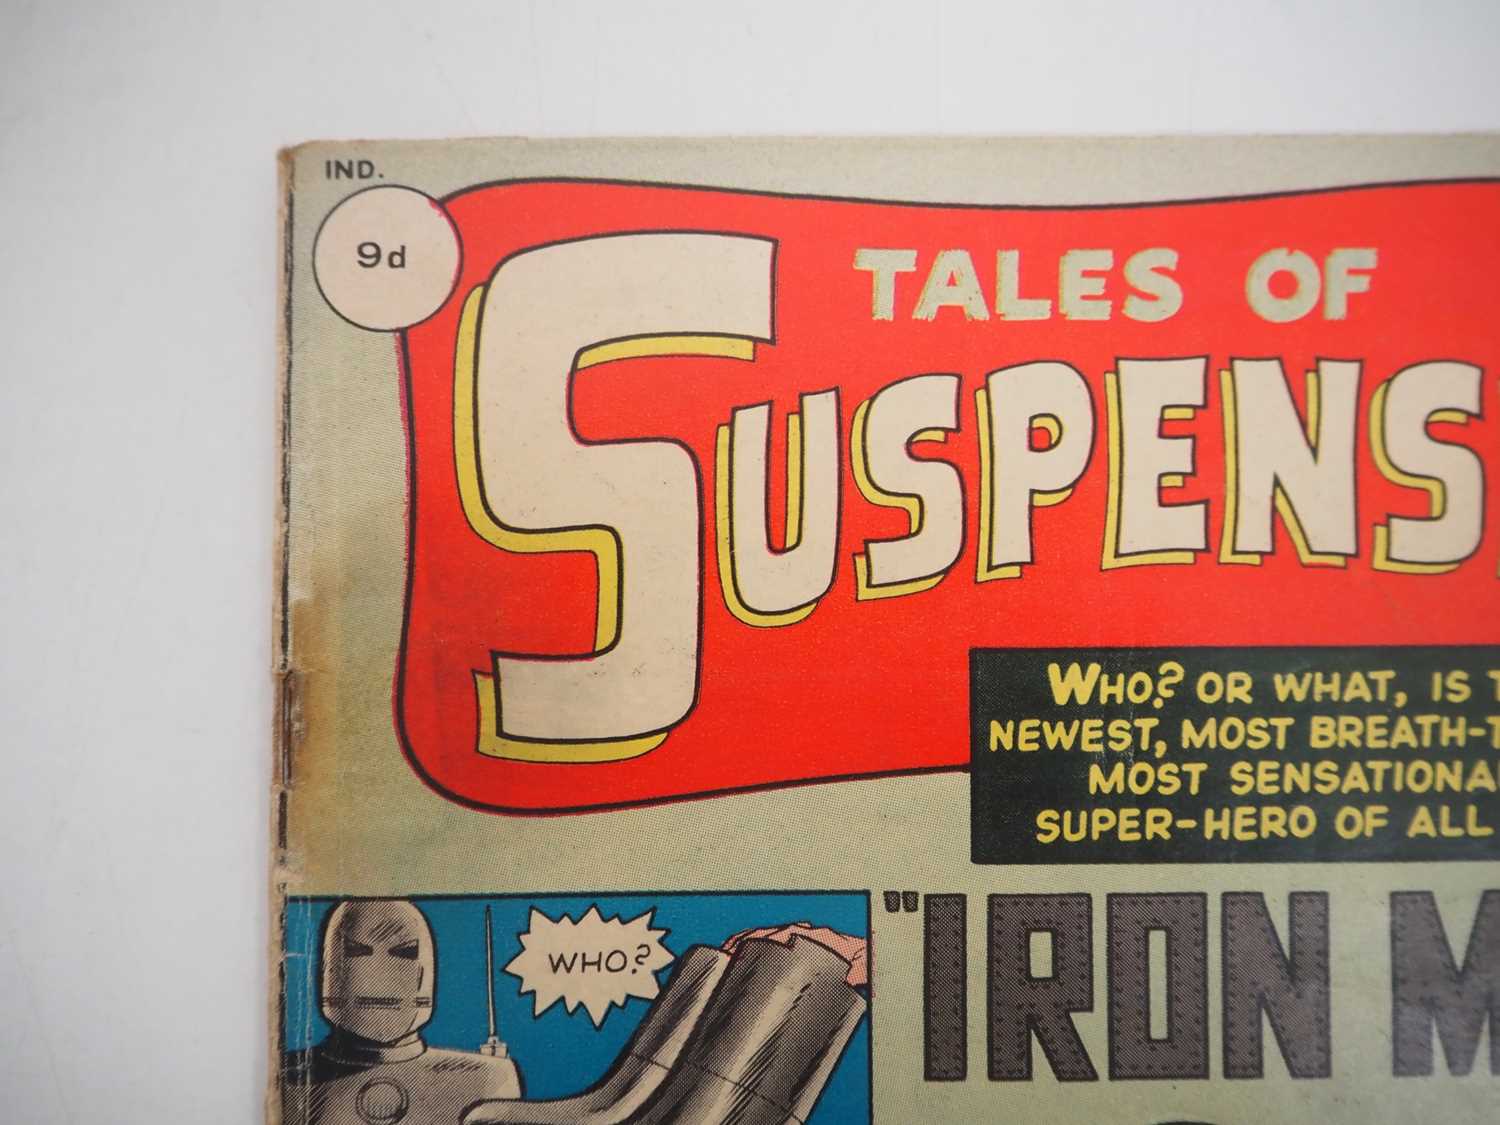 TALES OF SUSPENSE #39 - IRON MAN (1963 - MARVEL - UK Price Variant) KEY BOOK & one of the most - Image 2 of 31